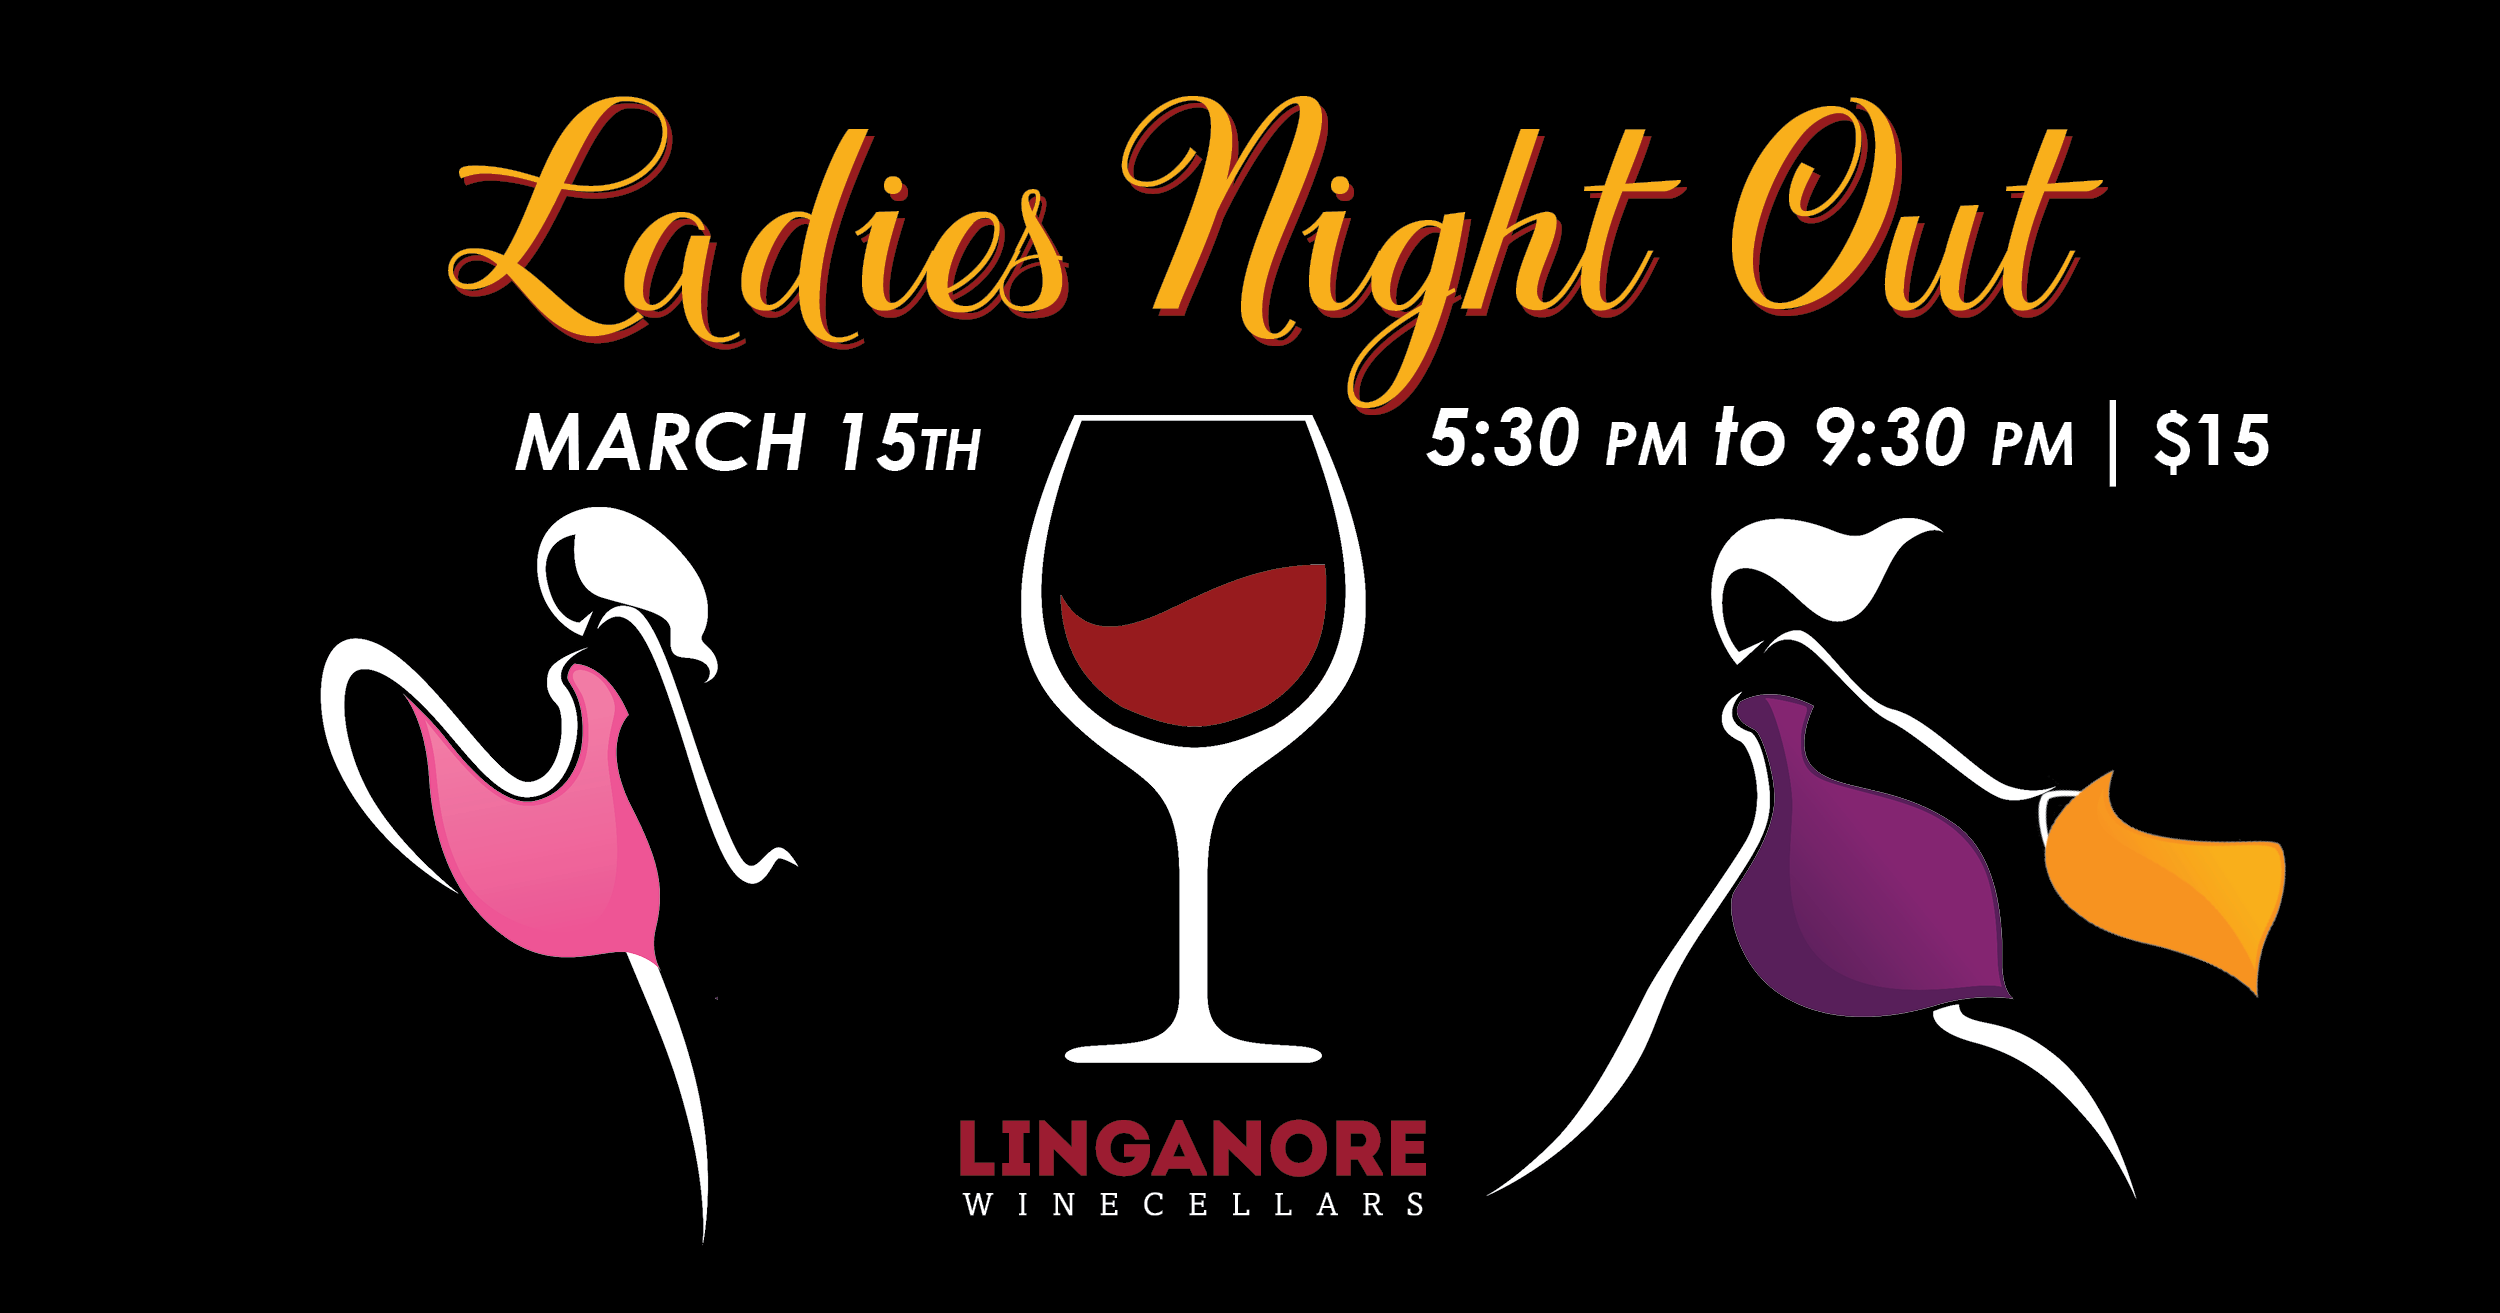 Ladies night is March 15th